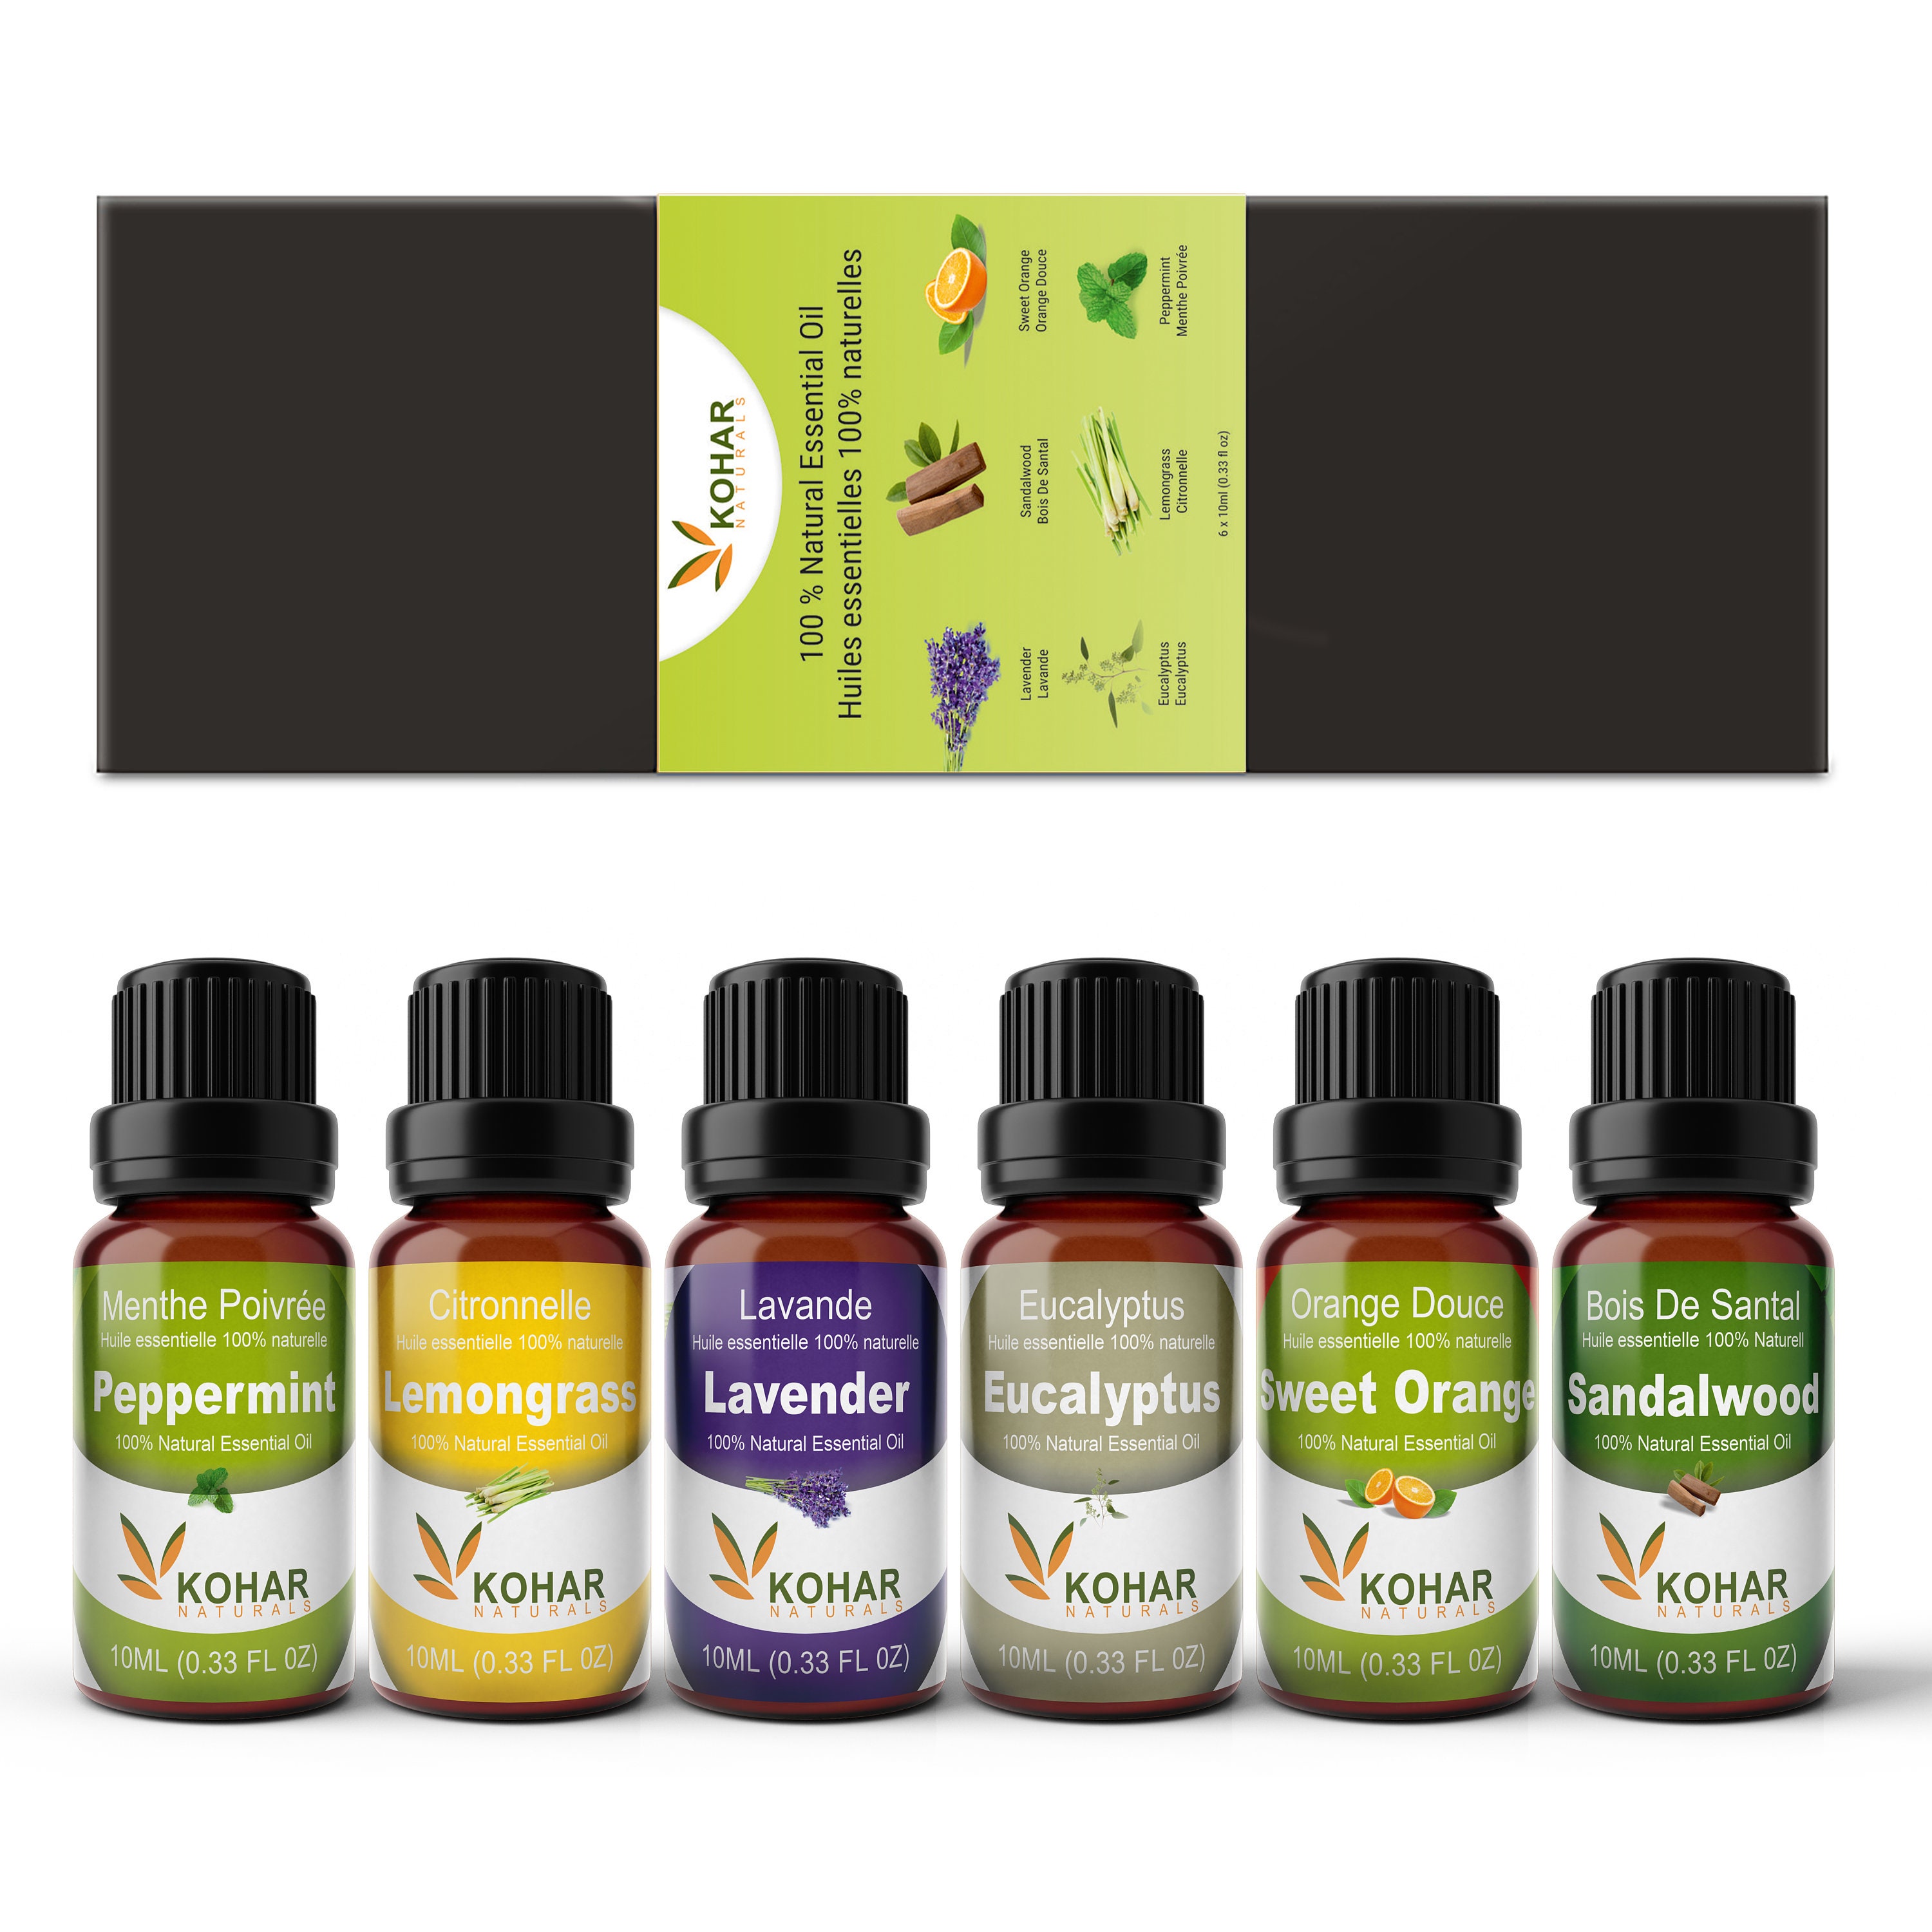  Plant Therapy 7 & 7 Essential Oils Set 7 Single Oils: Lavender,  Peppermint & More, 7 Synergy Blends 100% Pure, Undiluted, Natural  Aromatherapy, Therapeutic Grade 10 mL (1/3 oz) : Health & Household